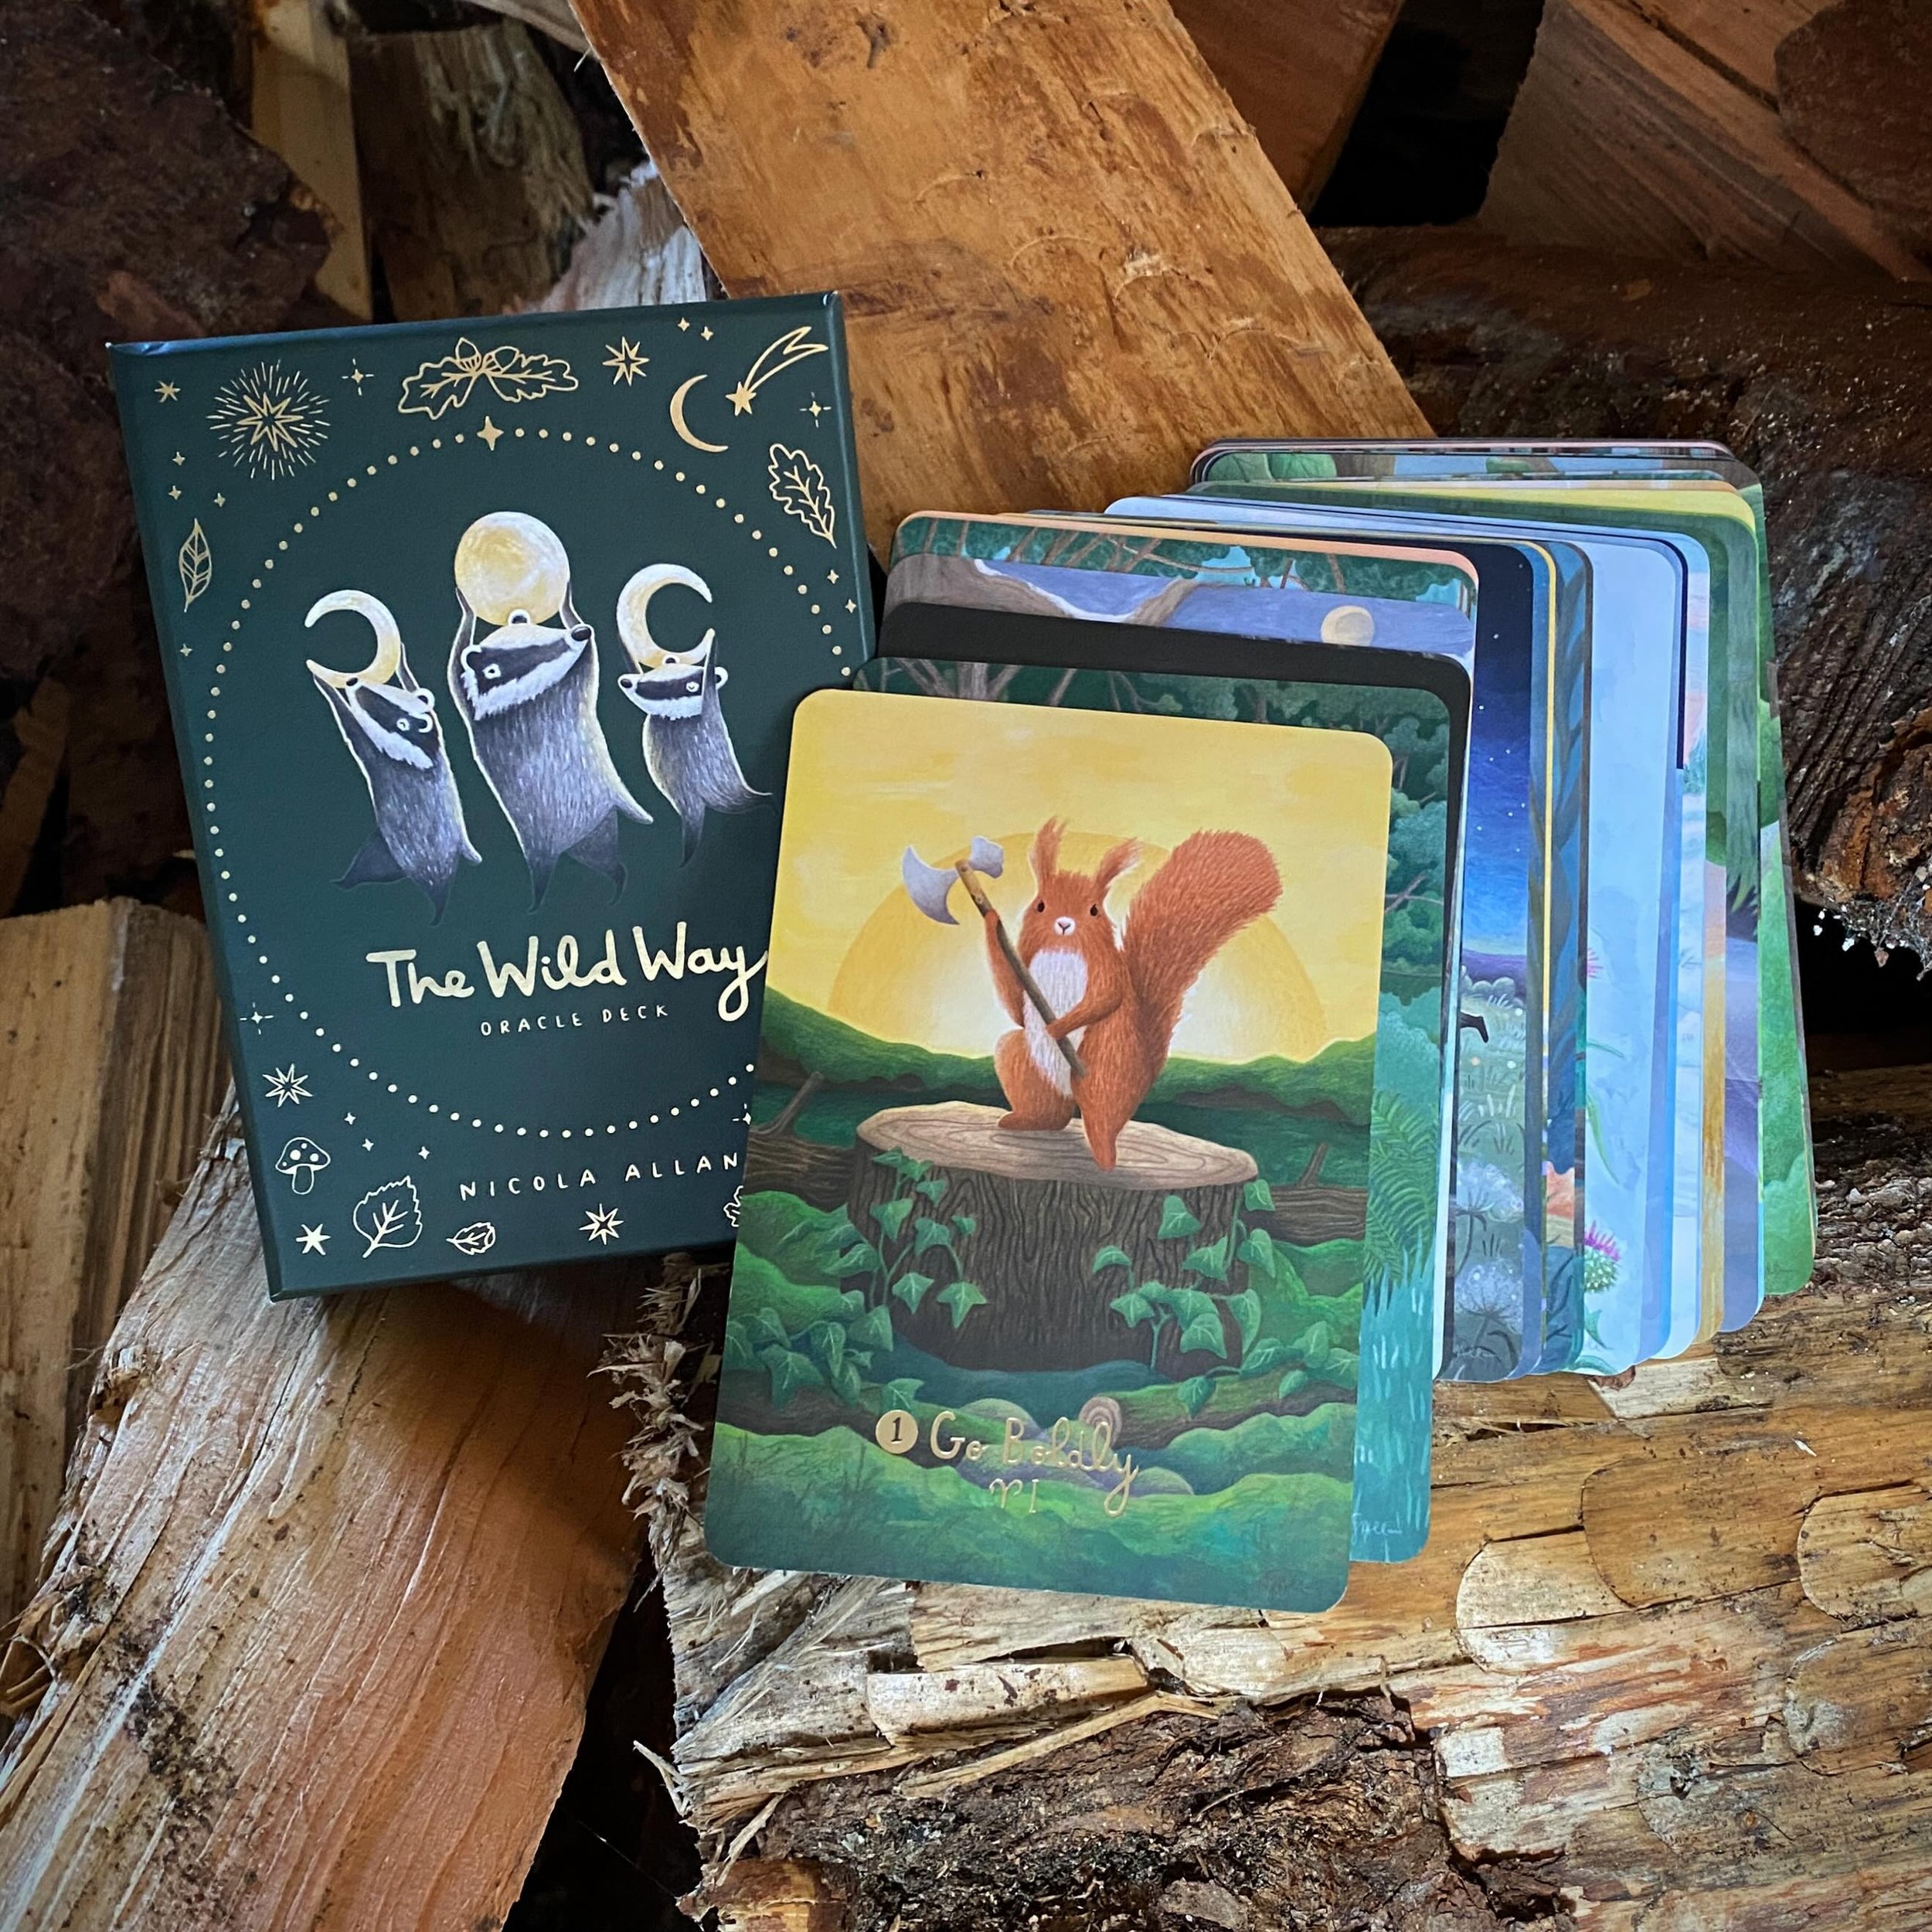 Aries I Squirrel is leading the charge! 🪓🐿️✨

The countdown to crowdfunding The Wild Way Oracle Book is now on&hellip; just a few short weeks until blast off now! 

There will be a limited number of early bird special deals so if you haven&rsquo;t 